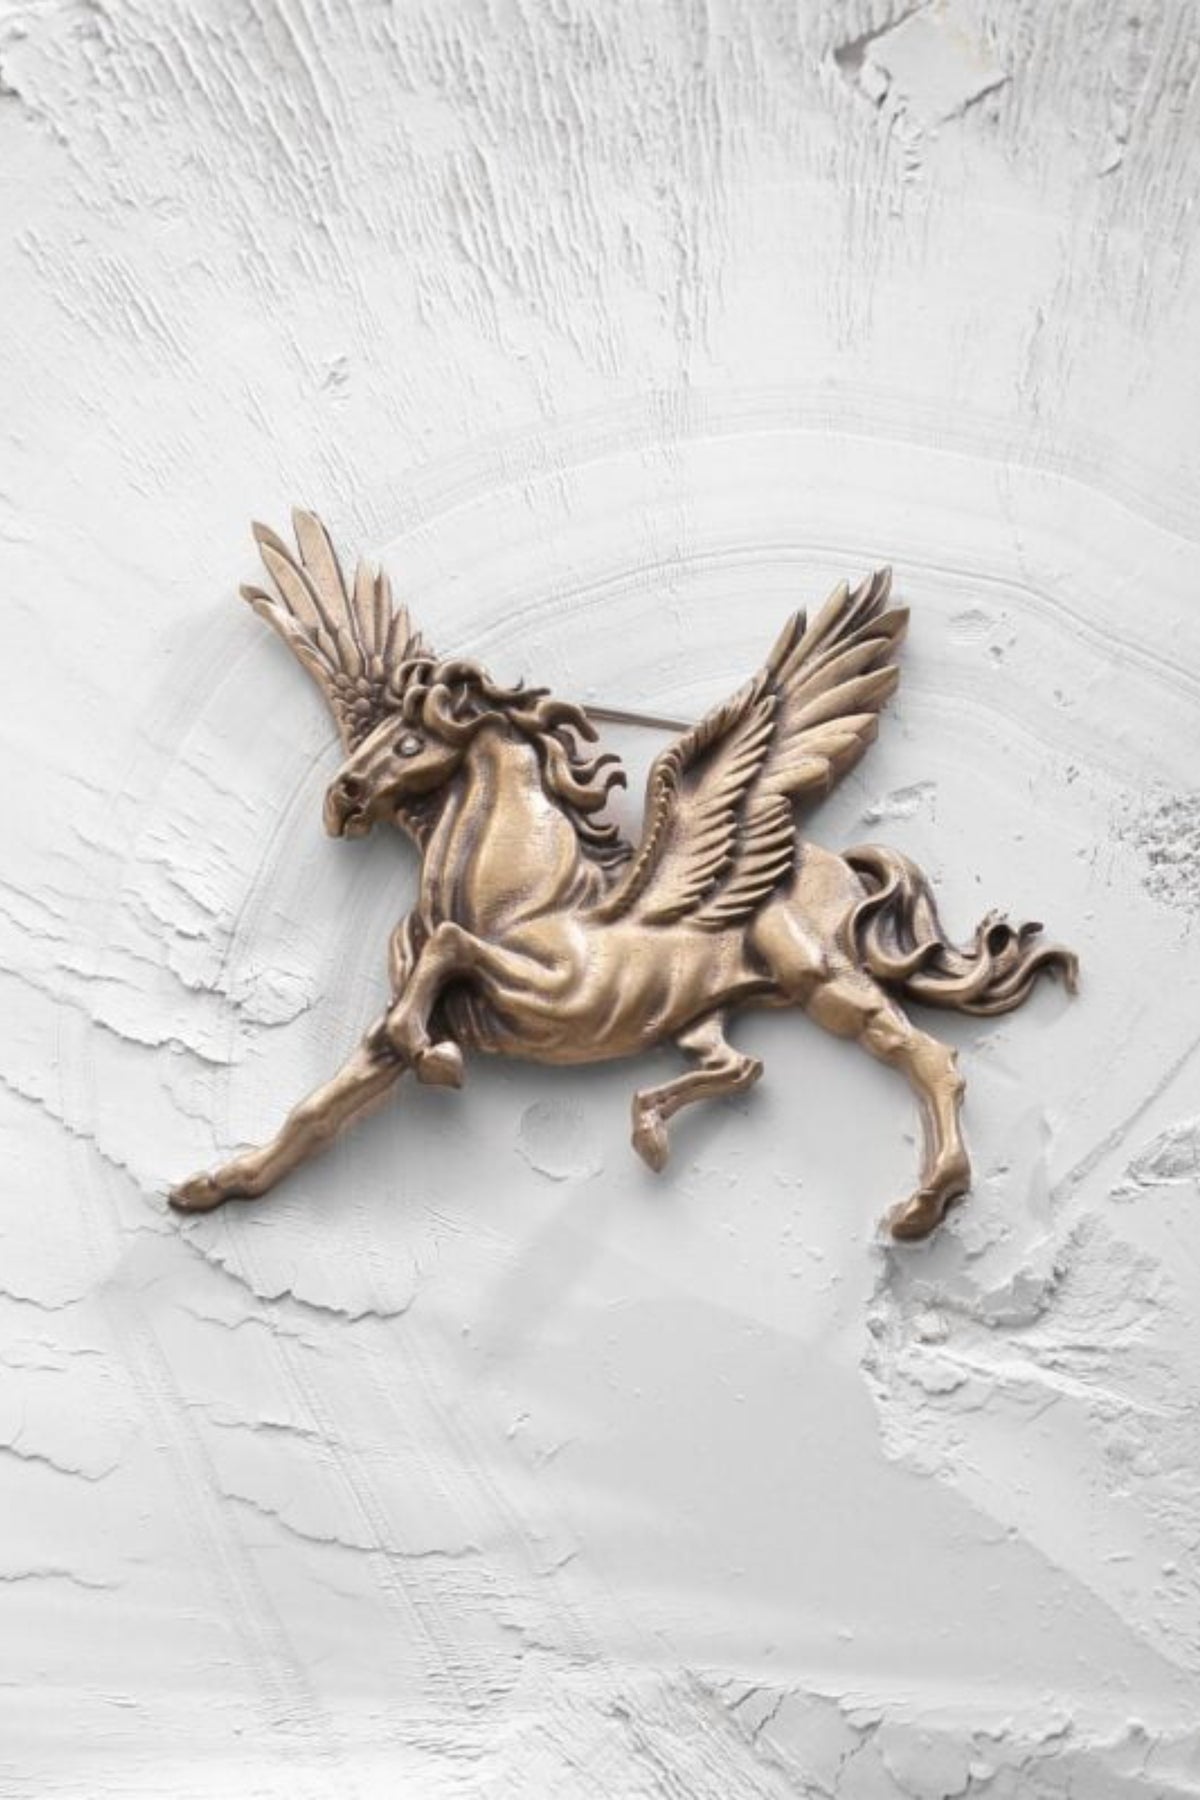 The Winged Horse Brooch